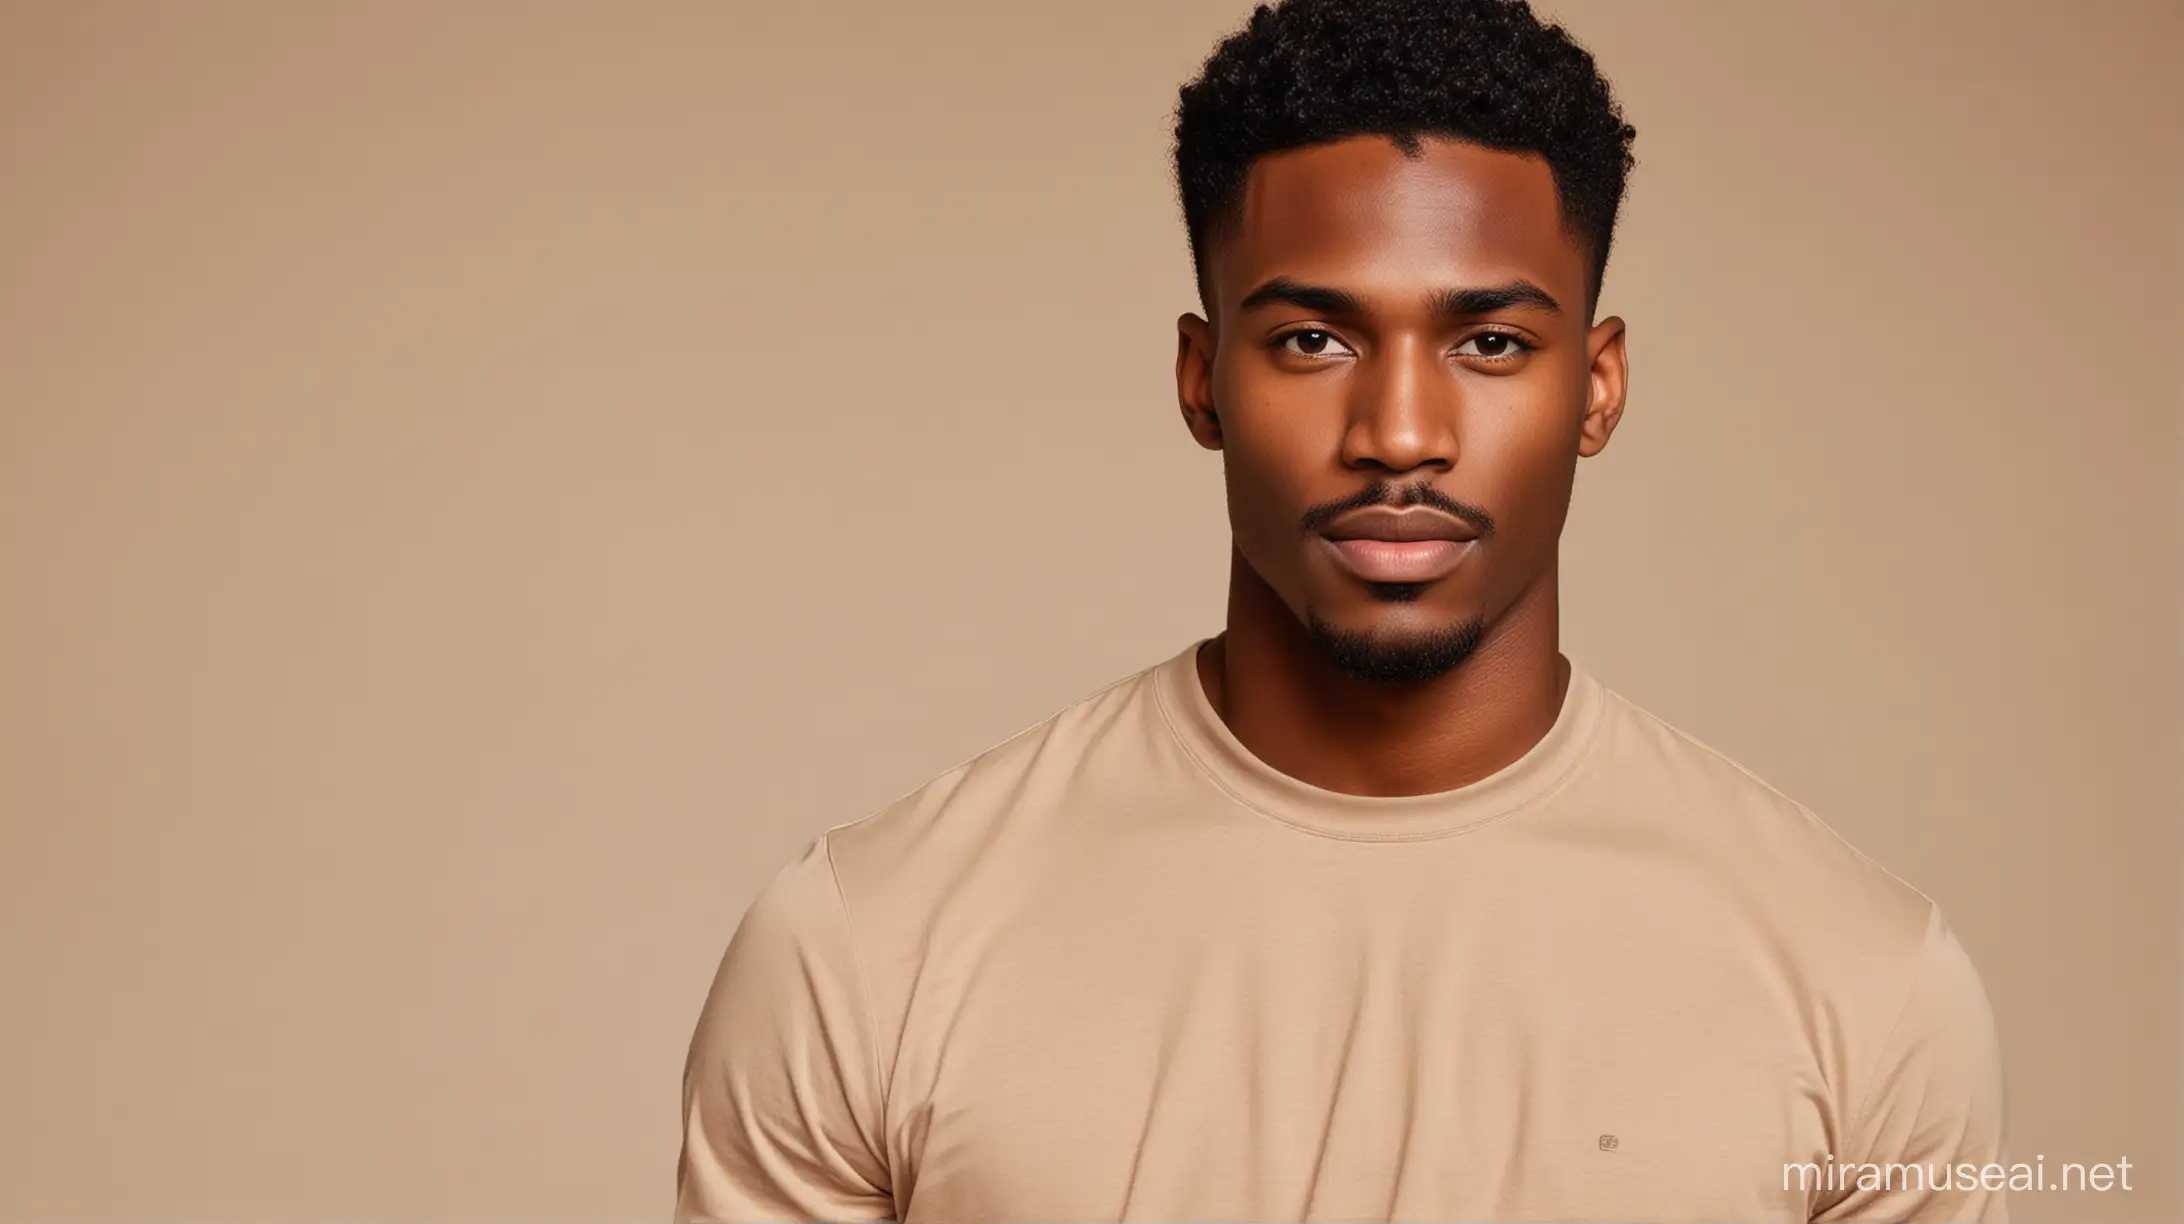 black man model with waves facing the camera with a plain tan t-shirt on